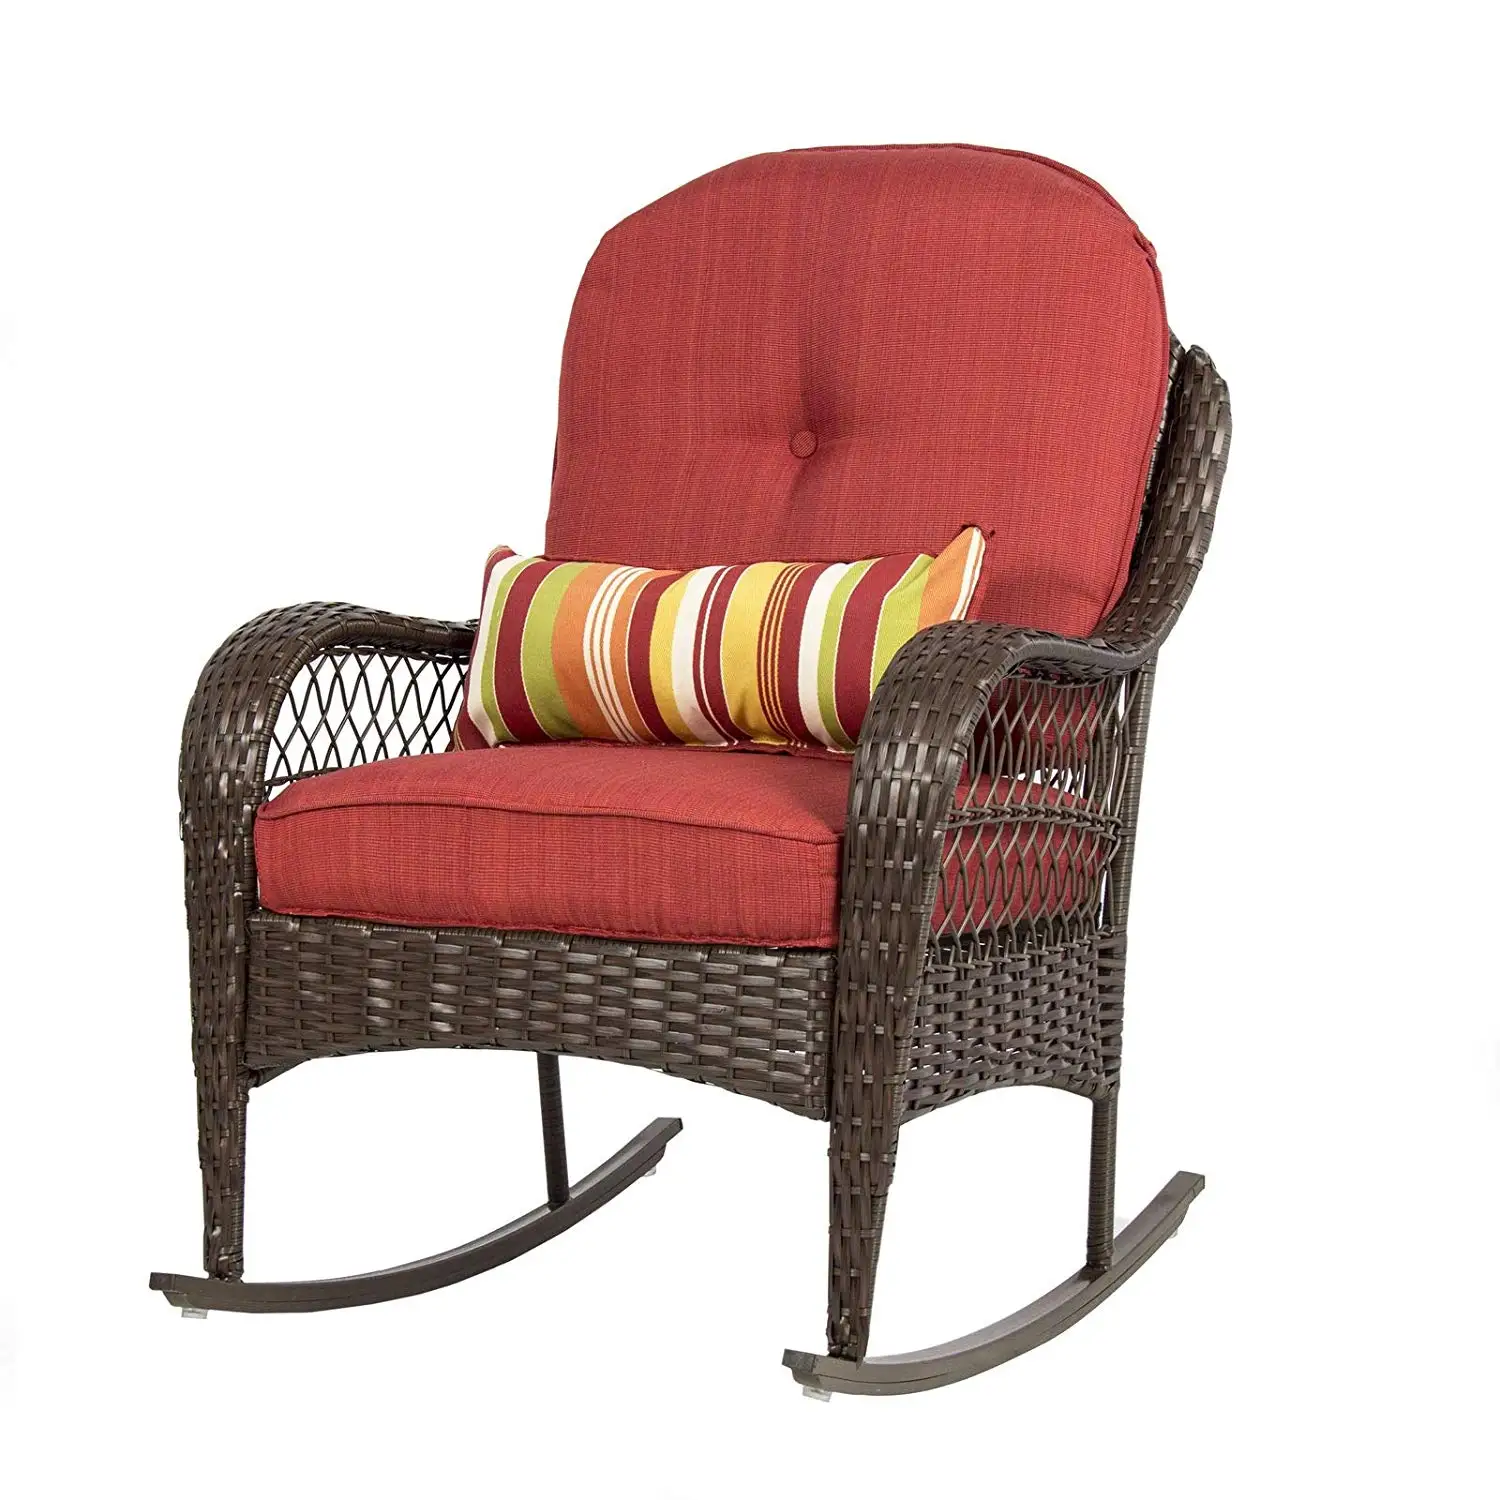 Buy Grand Patio Weather Resistant Wicker Rocking Chair with Breathable